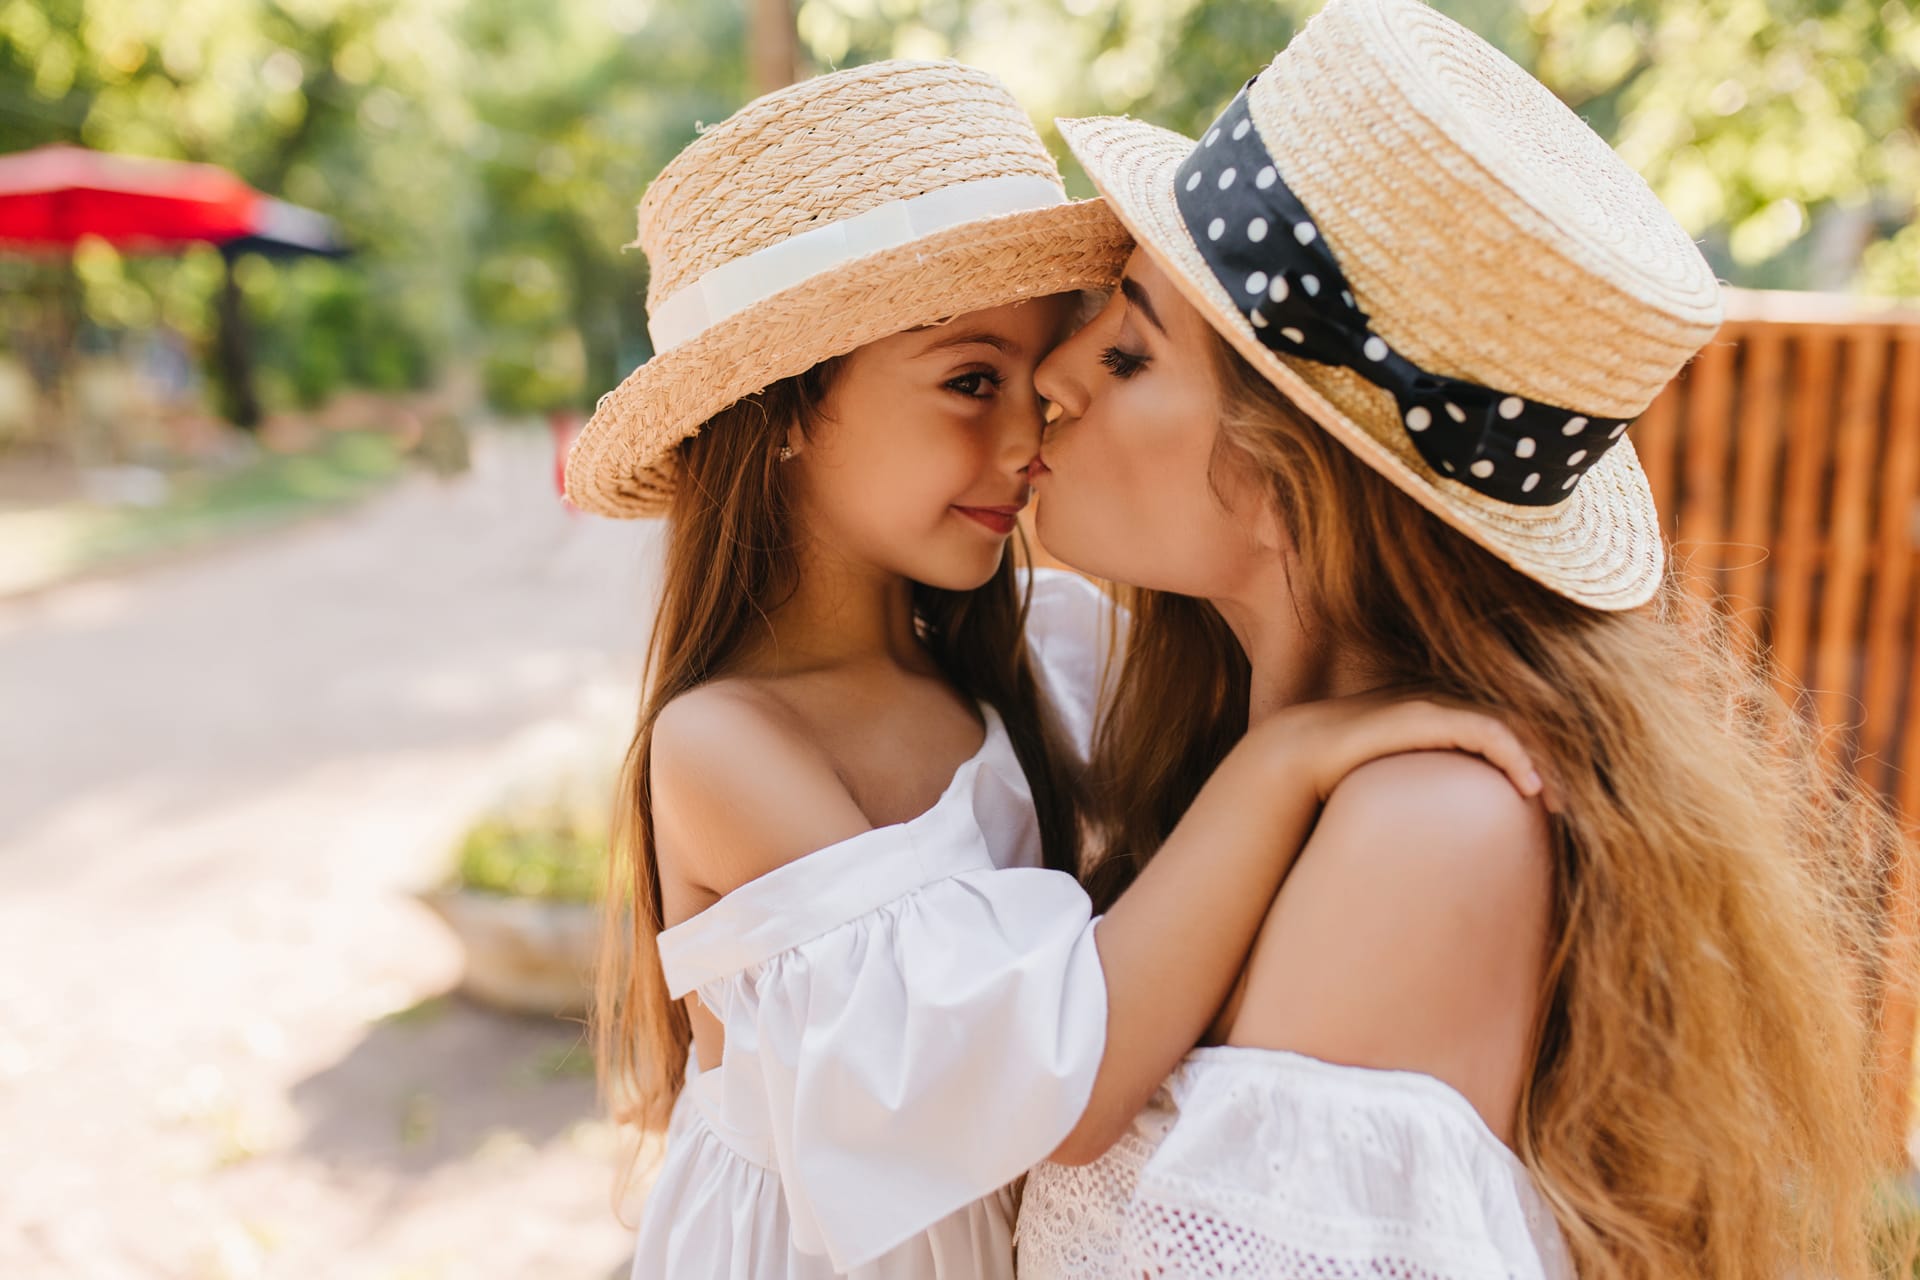 Young woman standing beside wooden fence kissing her little daughter with love